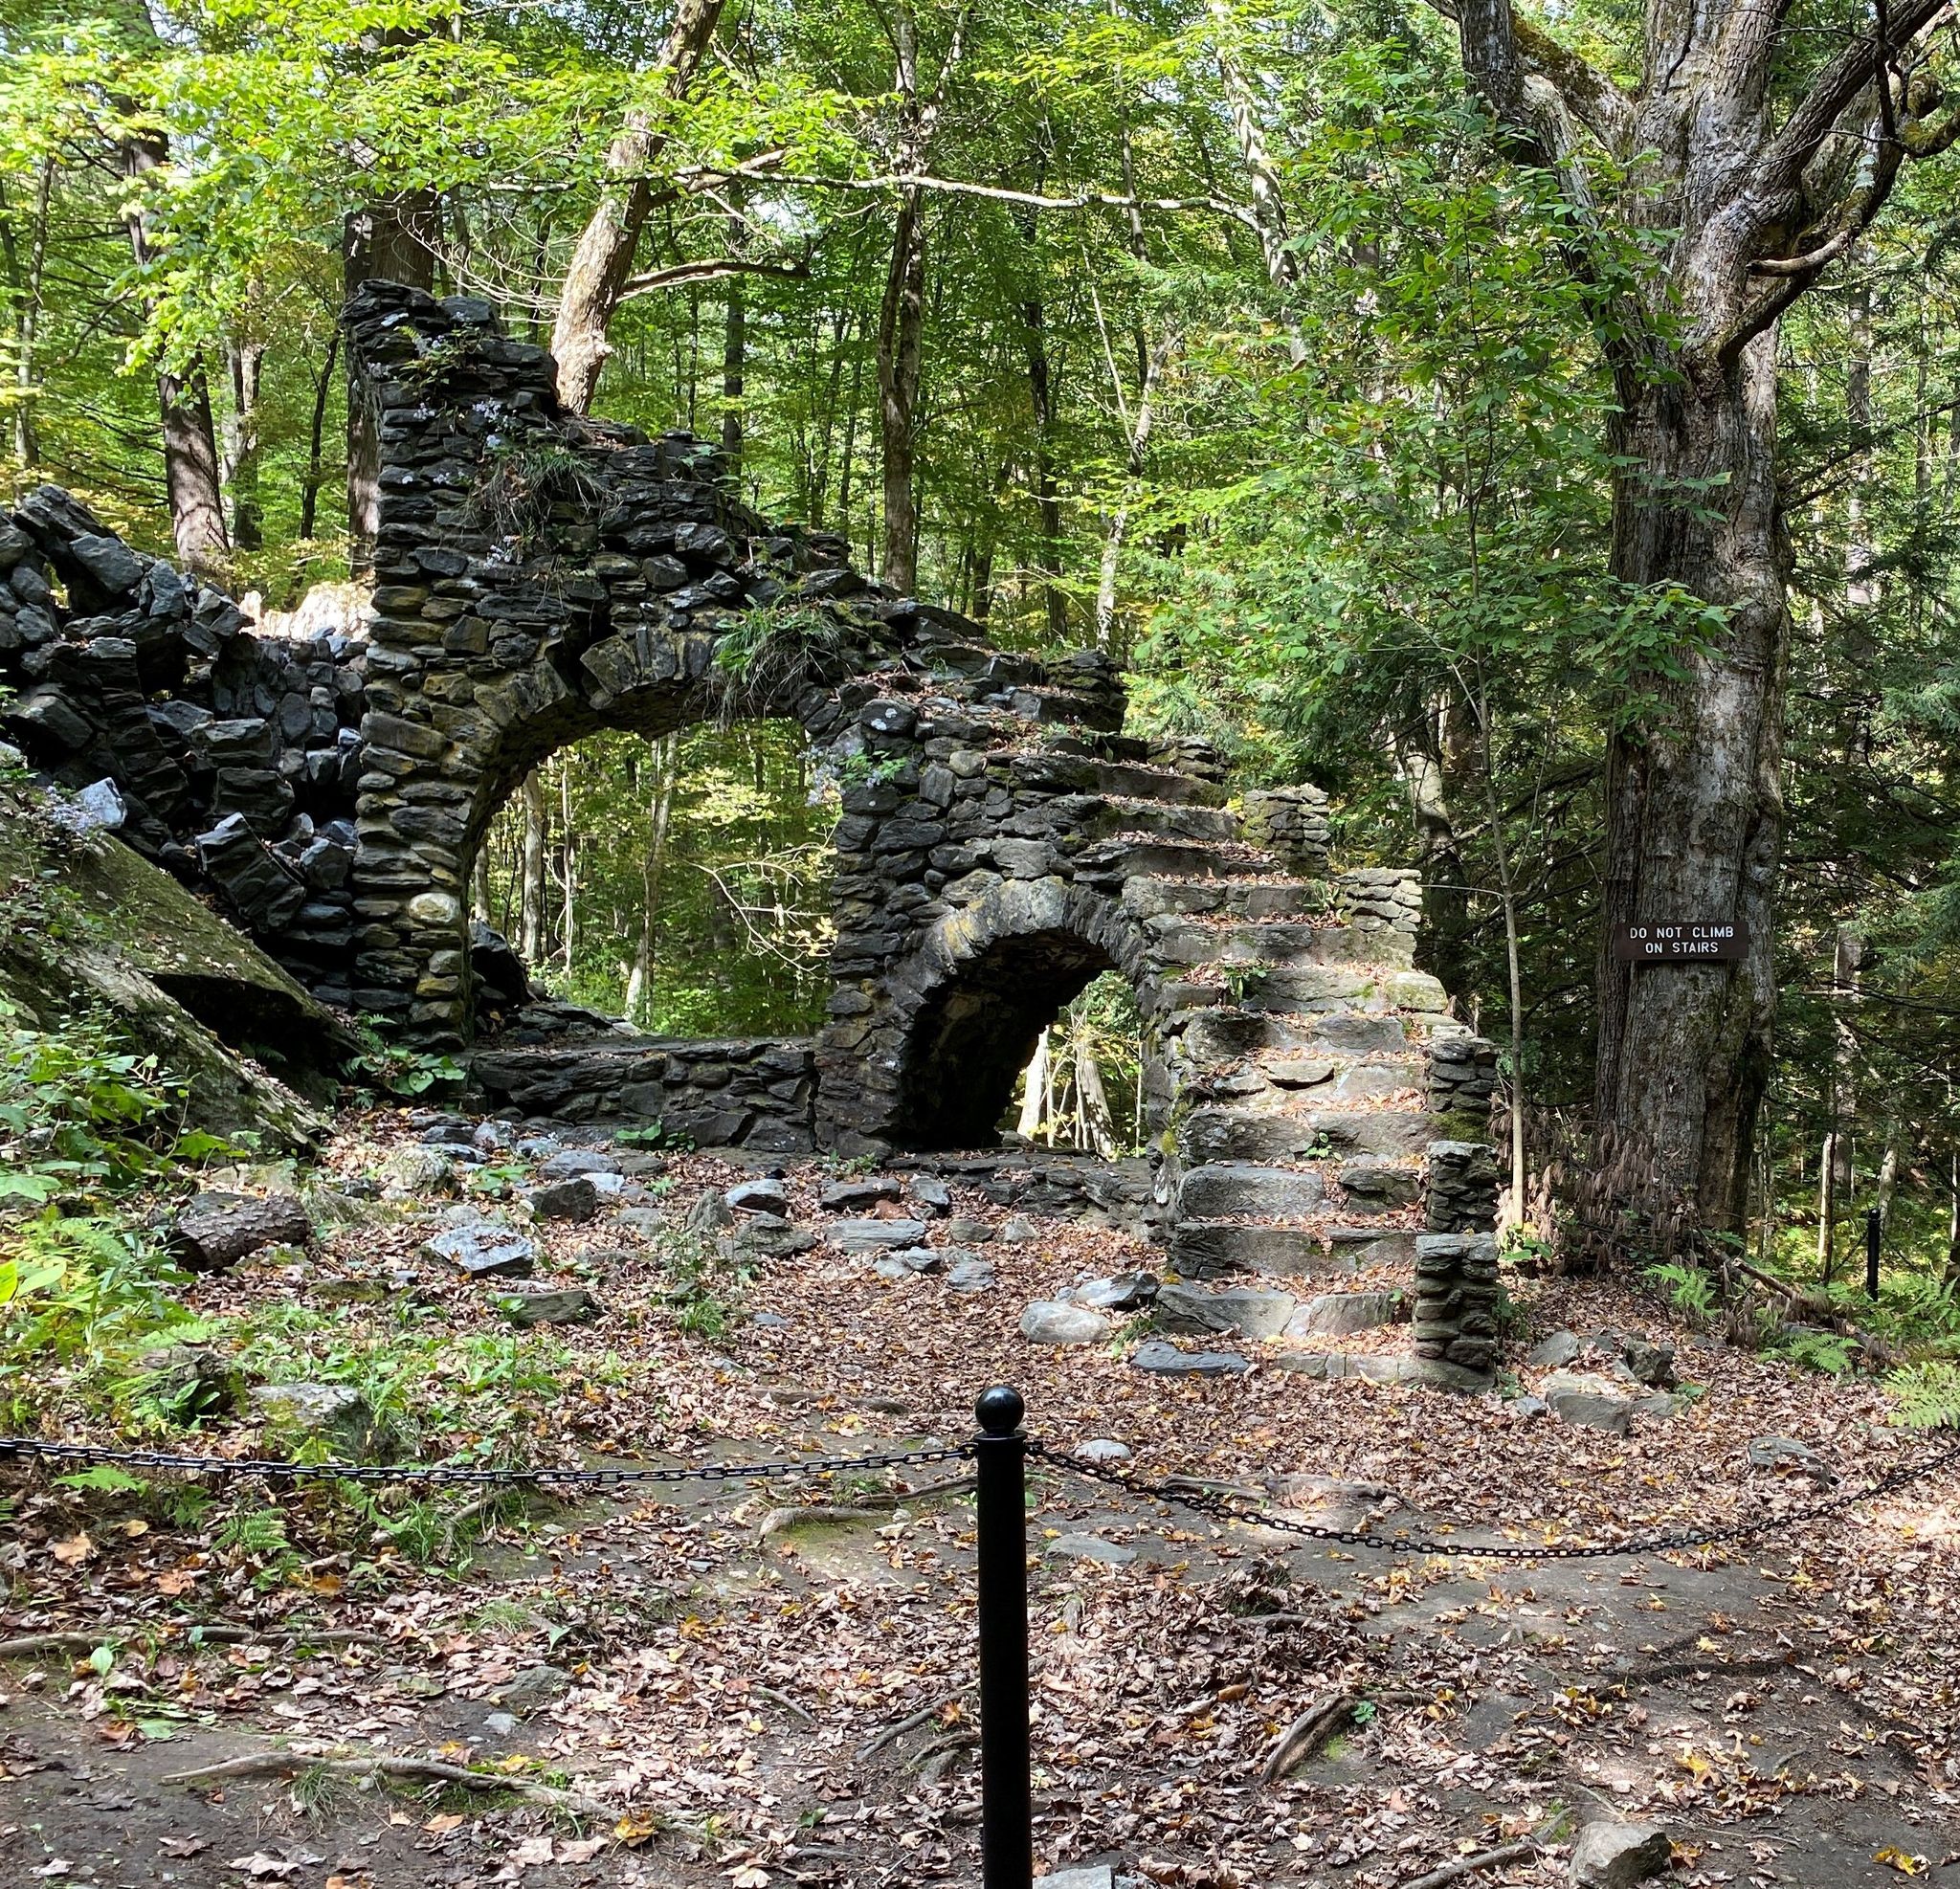 The remaining two stone arches at Madame Sherri's former "castle" after the top arch collapsed in 2021.